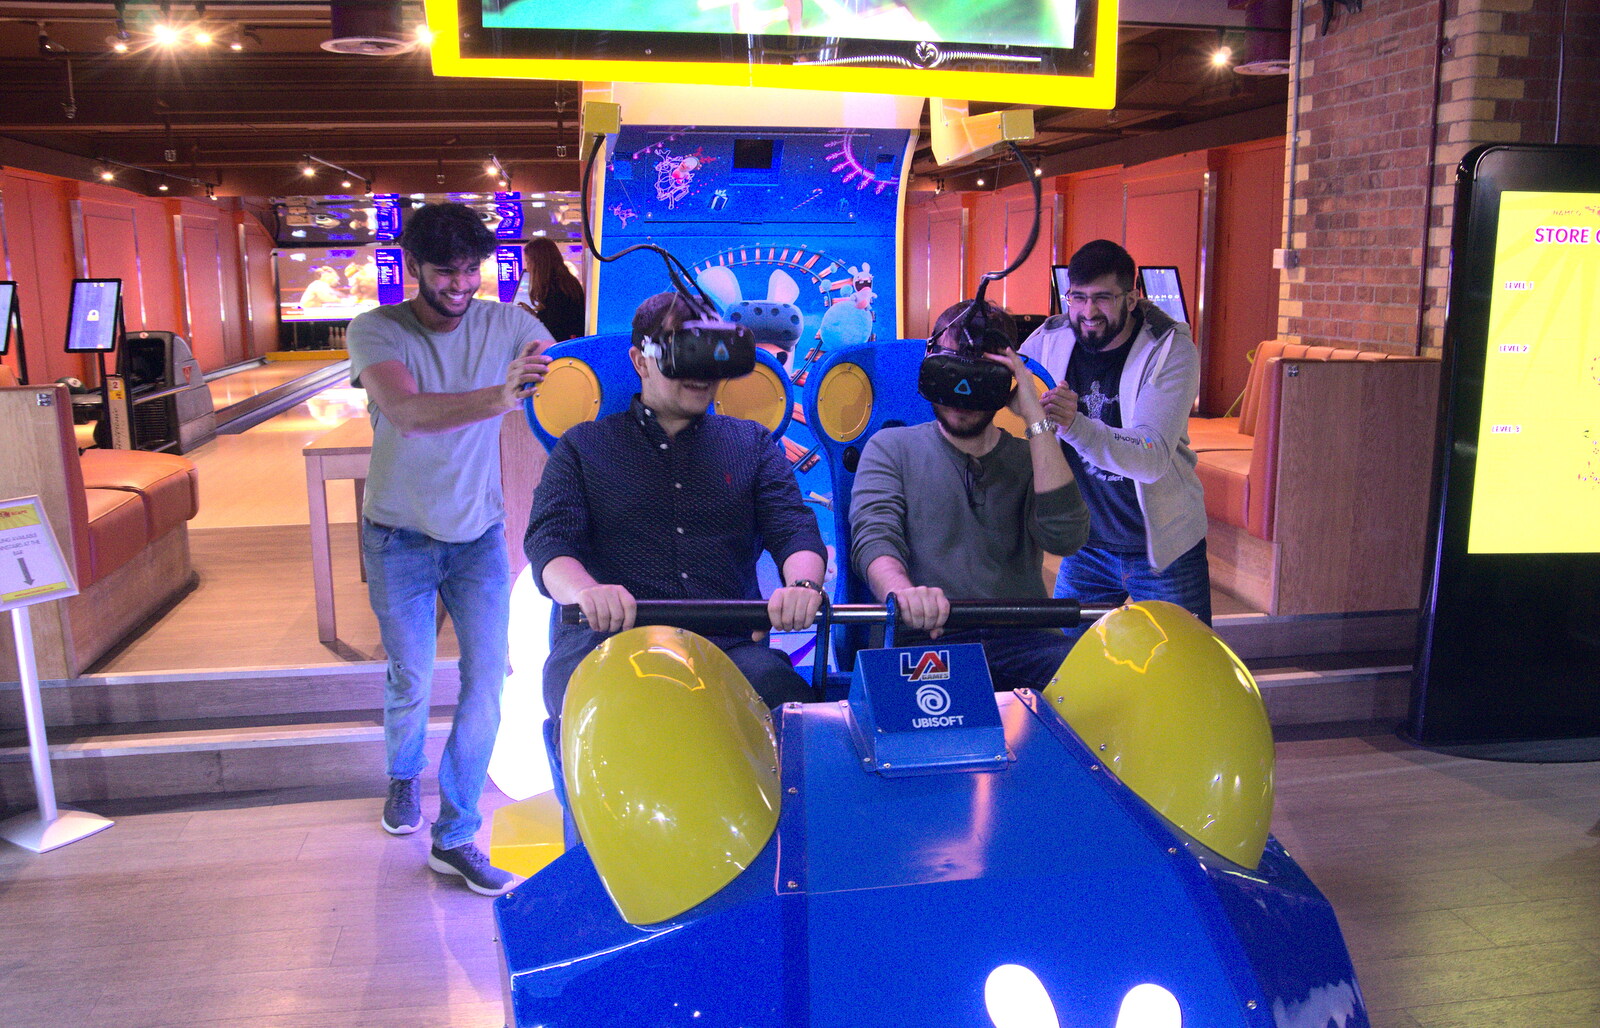 Praveen and Tehmur 'help' out on a VR thing from A Team Outing at Namco Funscape, South Bank, London - 27th March 2019